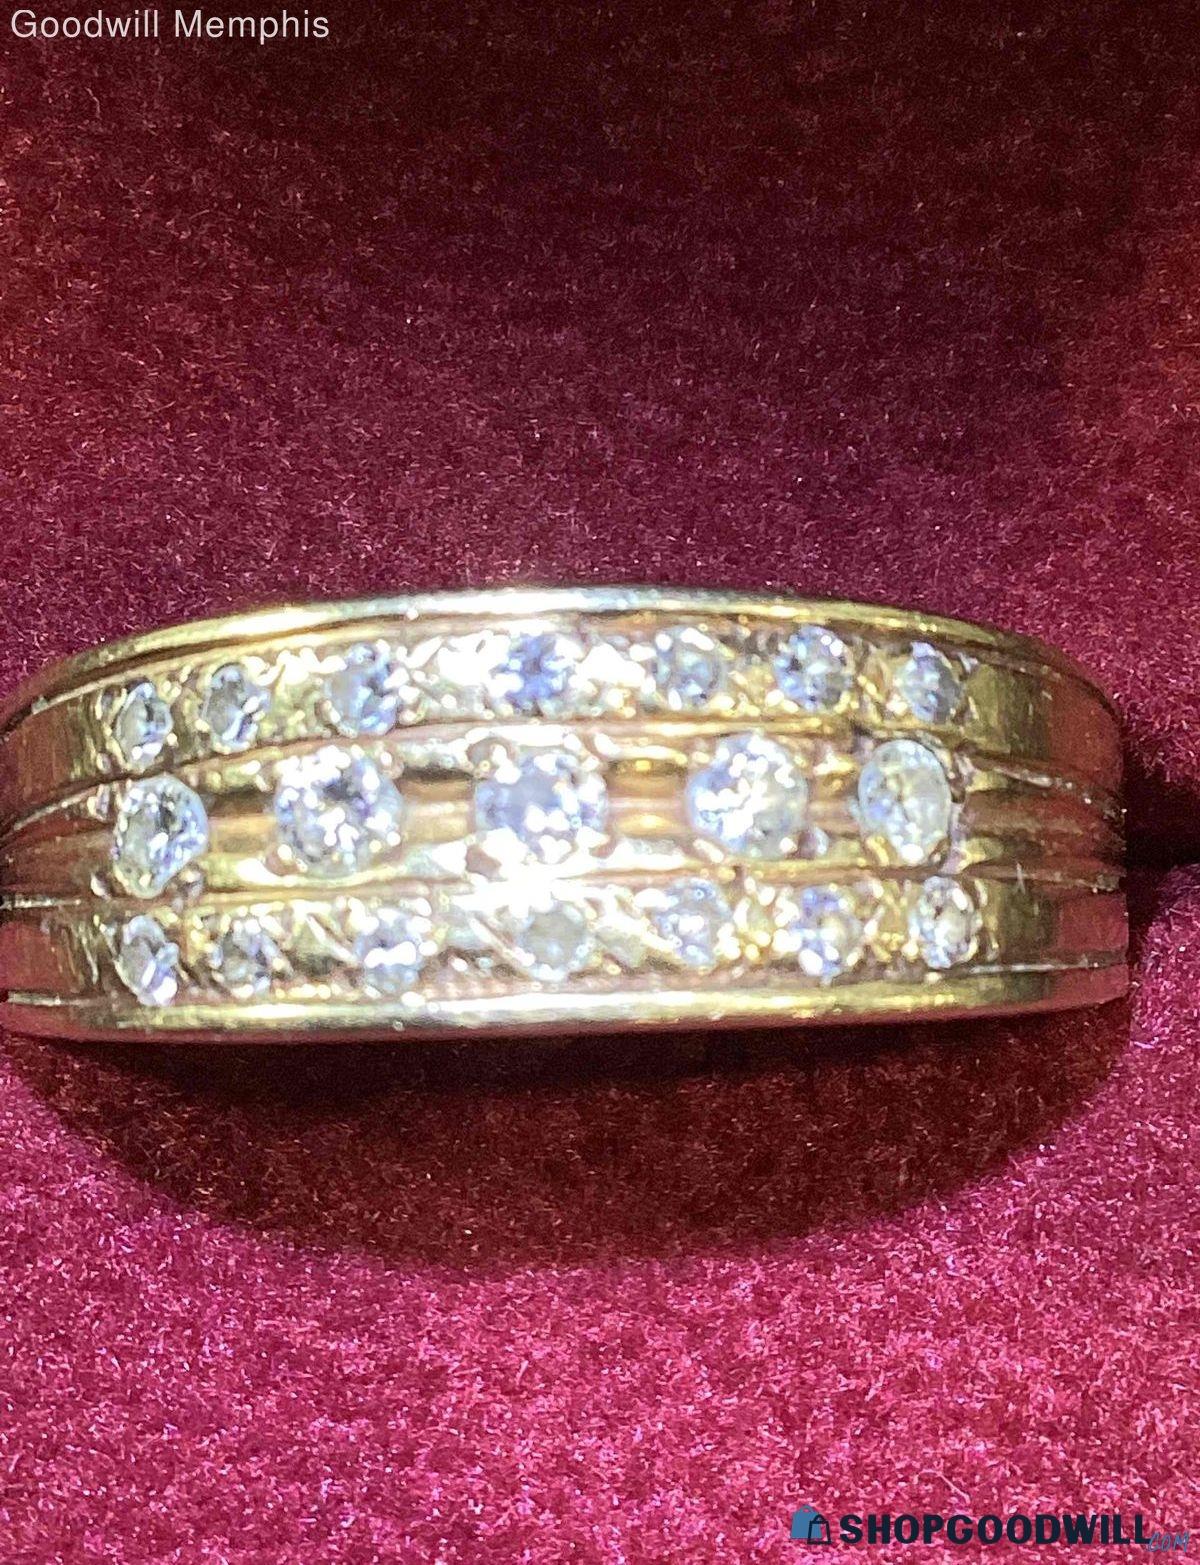 Tested 11.70k Gold & Tested 19 Diamond Ring - shopgoodwill.com